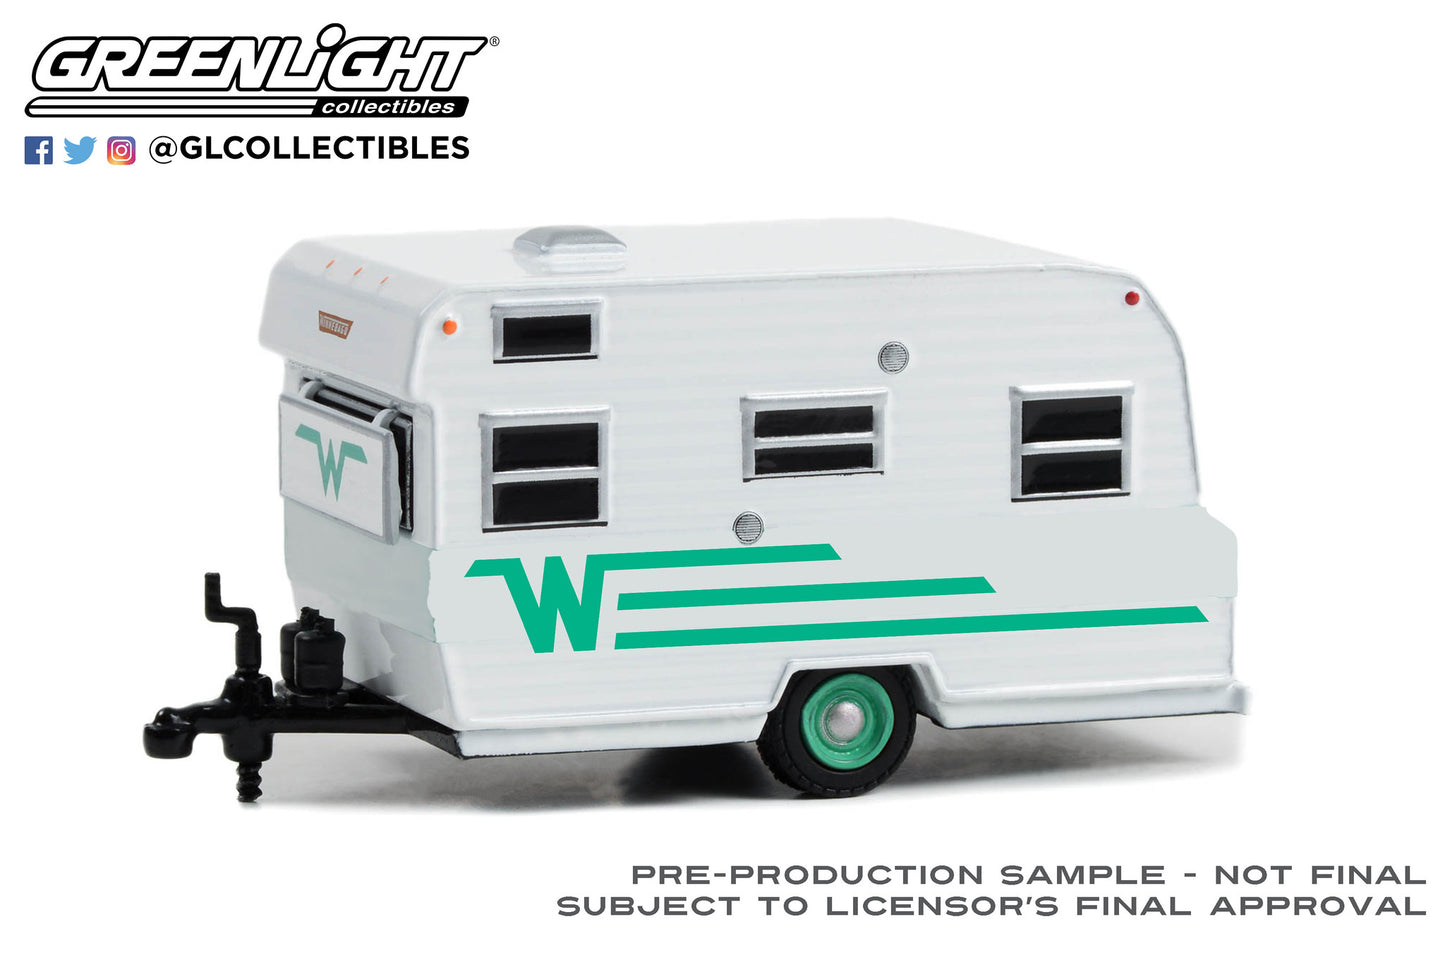 GreenLight 1:64 Hitched Homes Series 14 - 1965 Winnebago Travel Trailer 216 - White with Green Stripe 34140-C